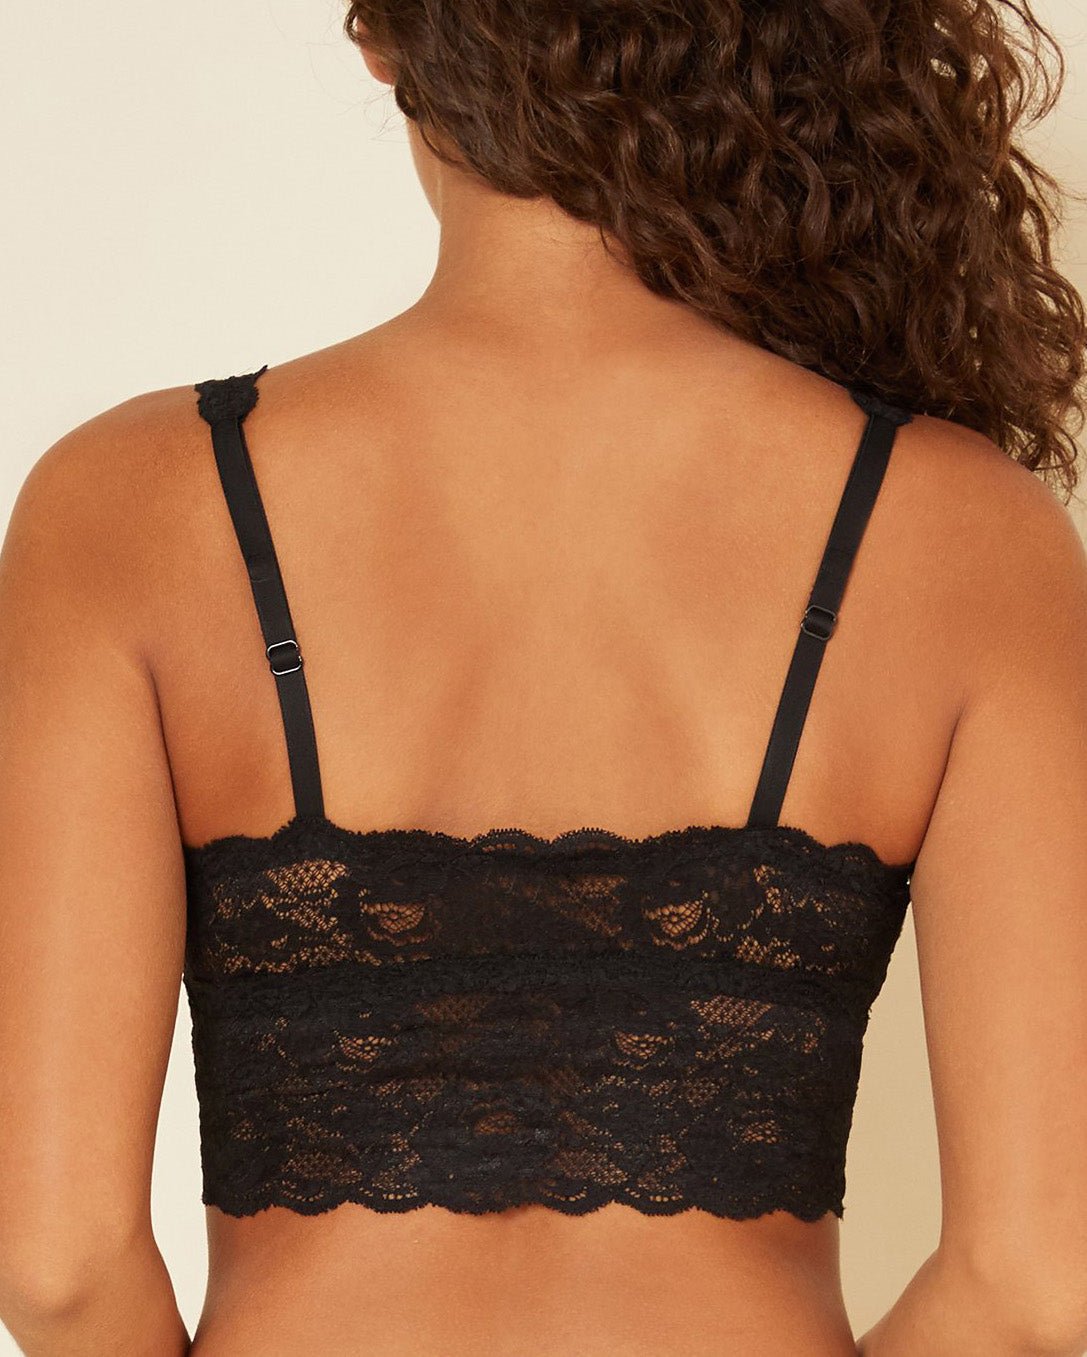 Bralettes - An Intimate Affaire